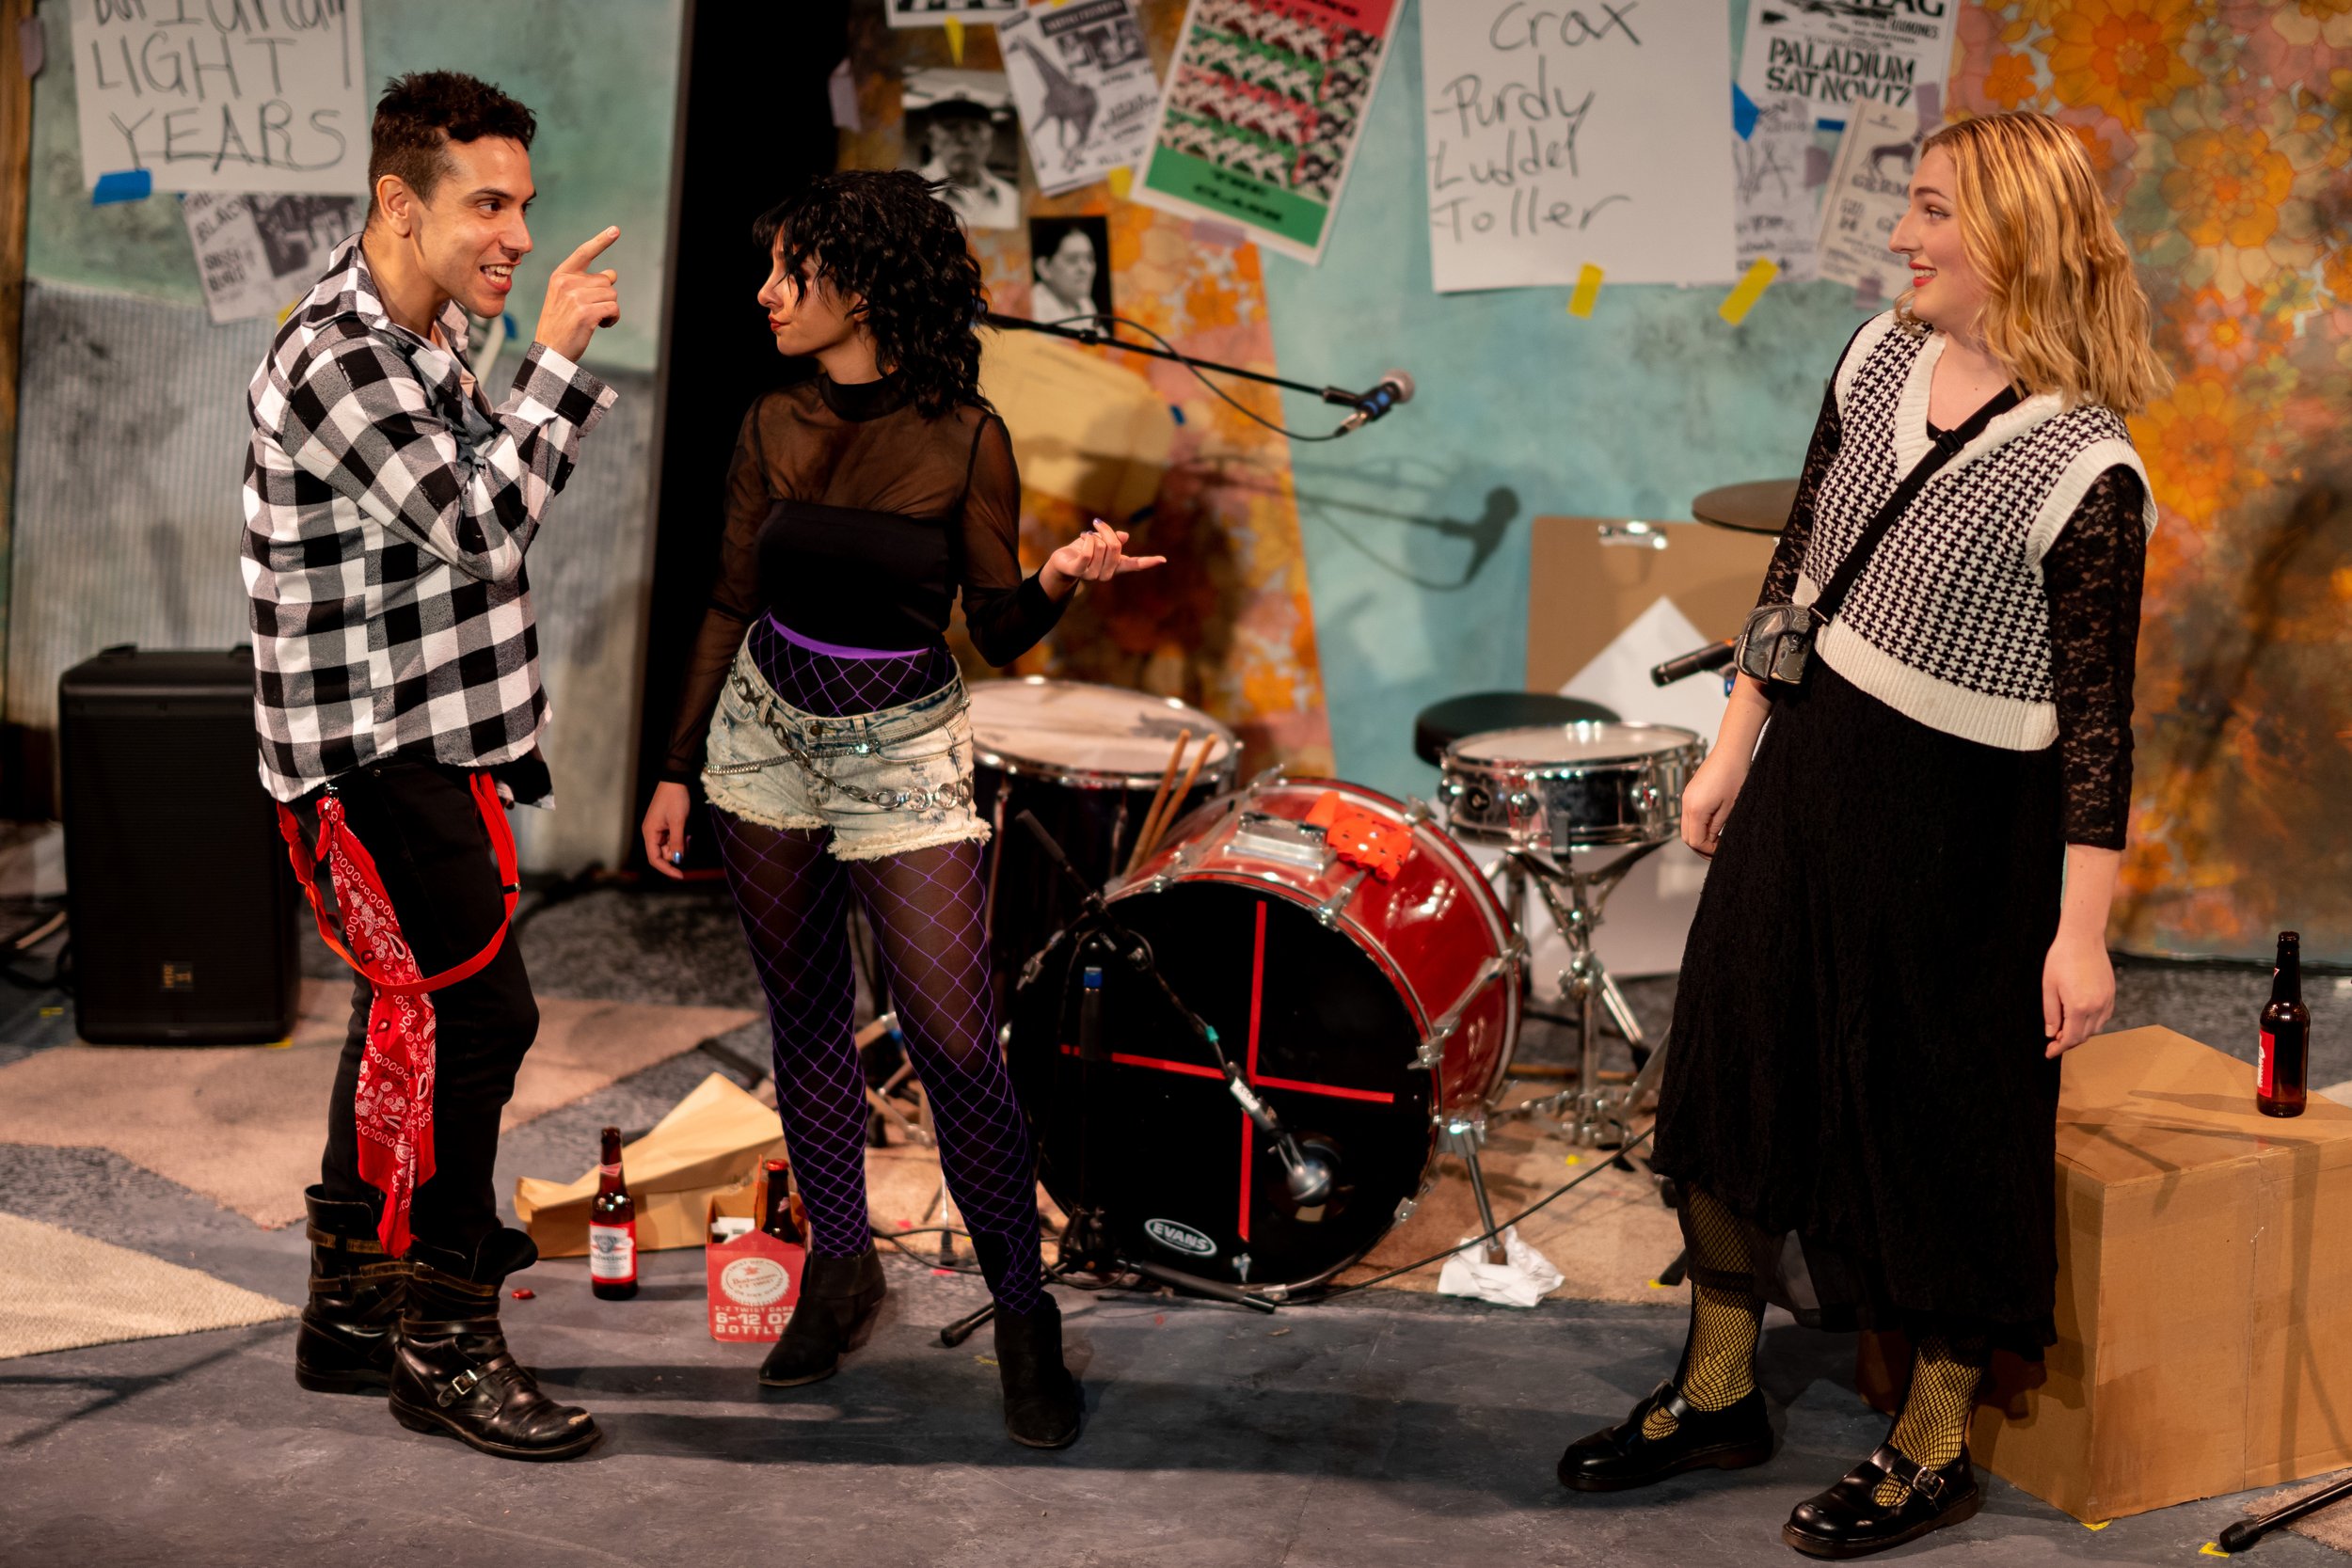  The trio argues in a scene from a performance of "Adobe Punk" ; (l-r) " Isaac Cruz as "Manny", Giselle Etessami as "Kat, and Karis Brizendine as "Noreen." Photo Credit: Rob Aft 